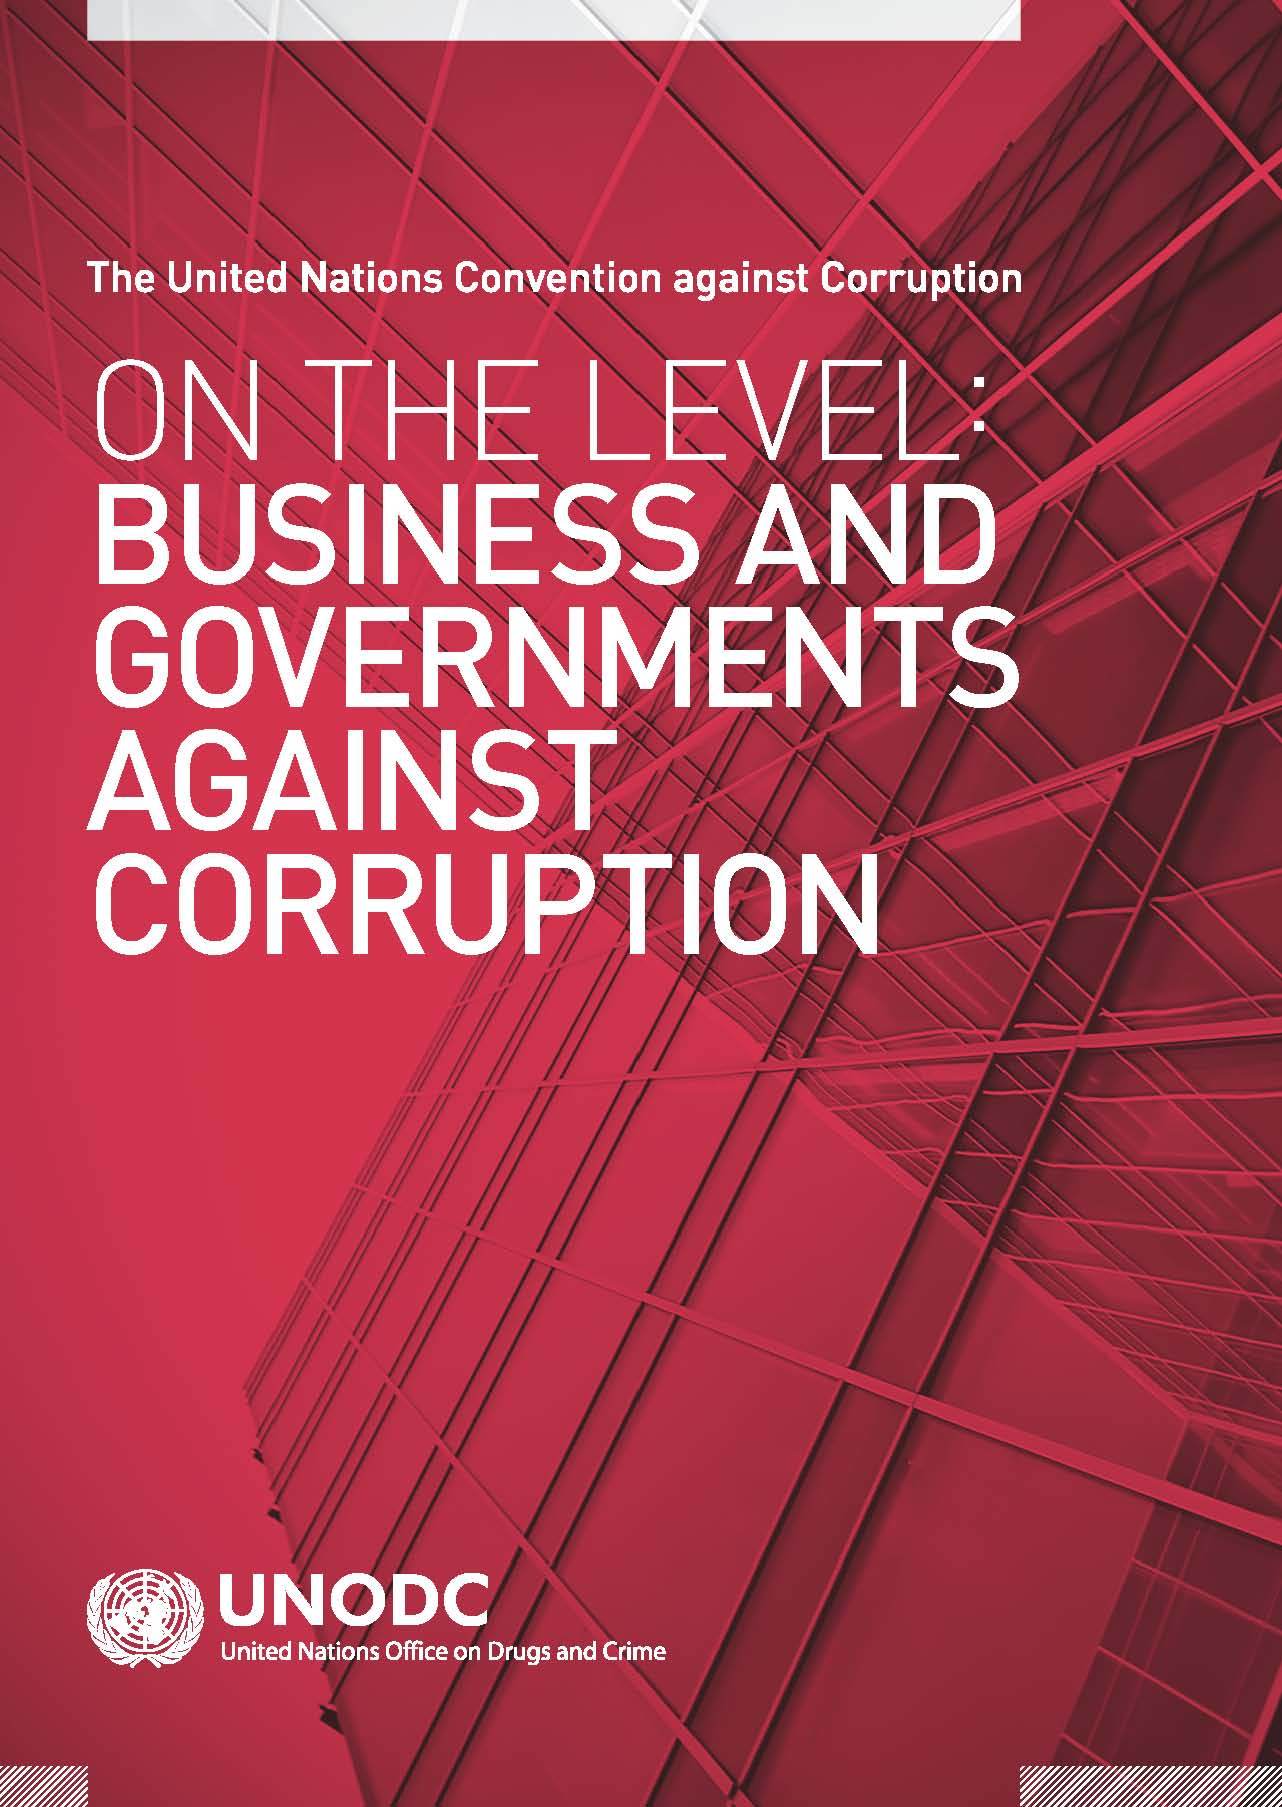 BUSINESS AND GOVERNMENTS AGAINST CORRUPTION